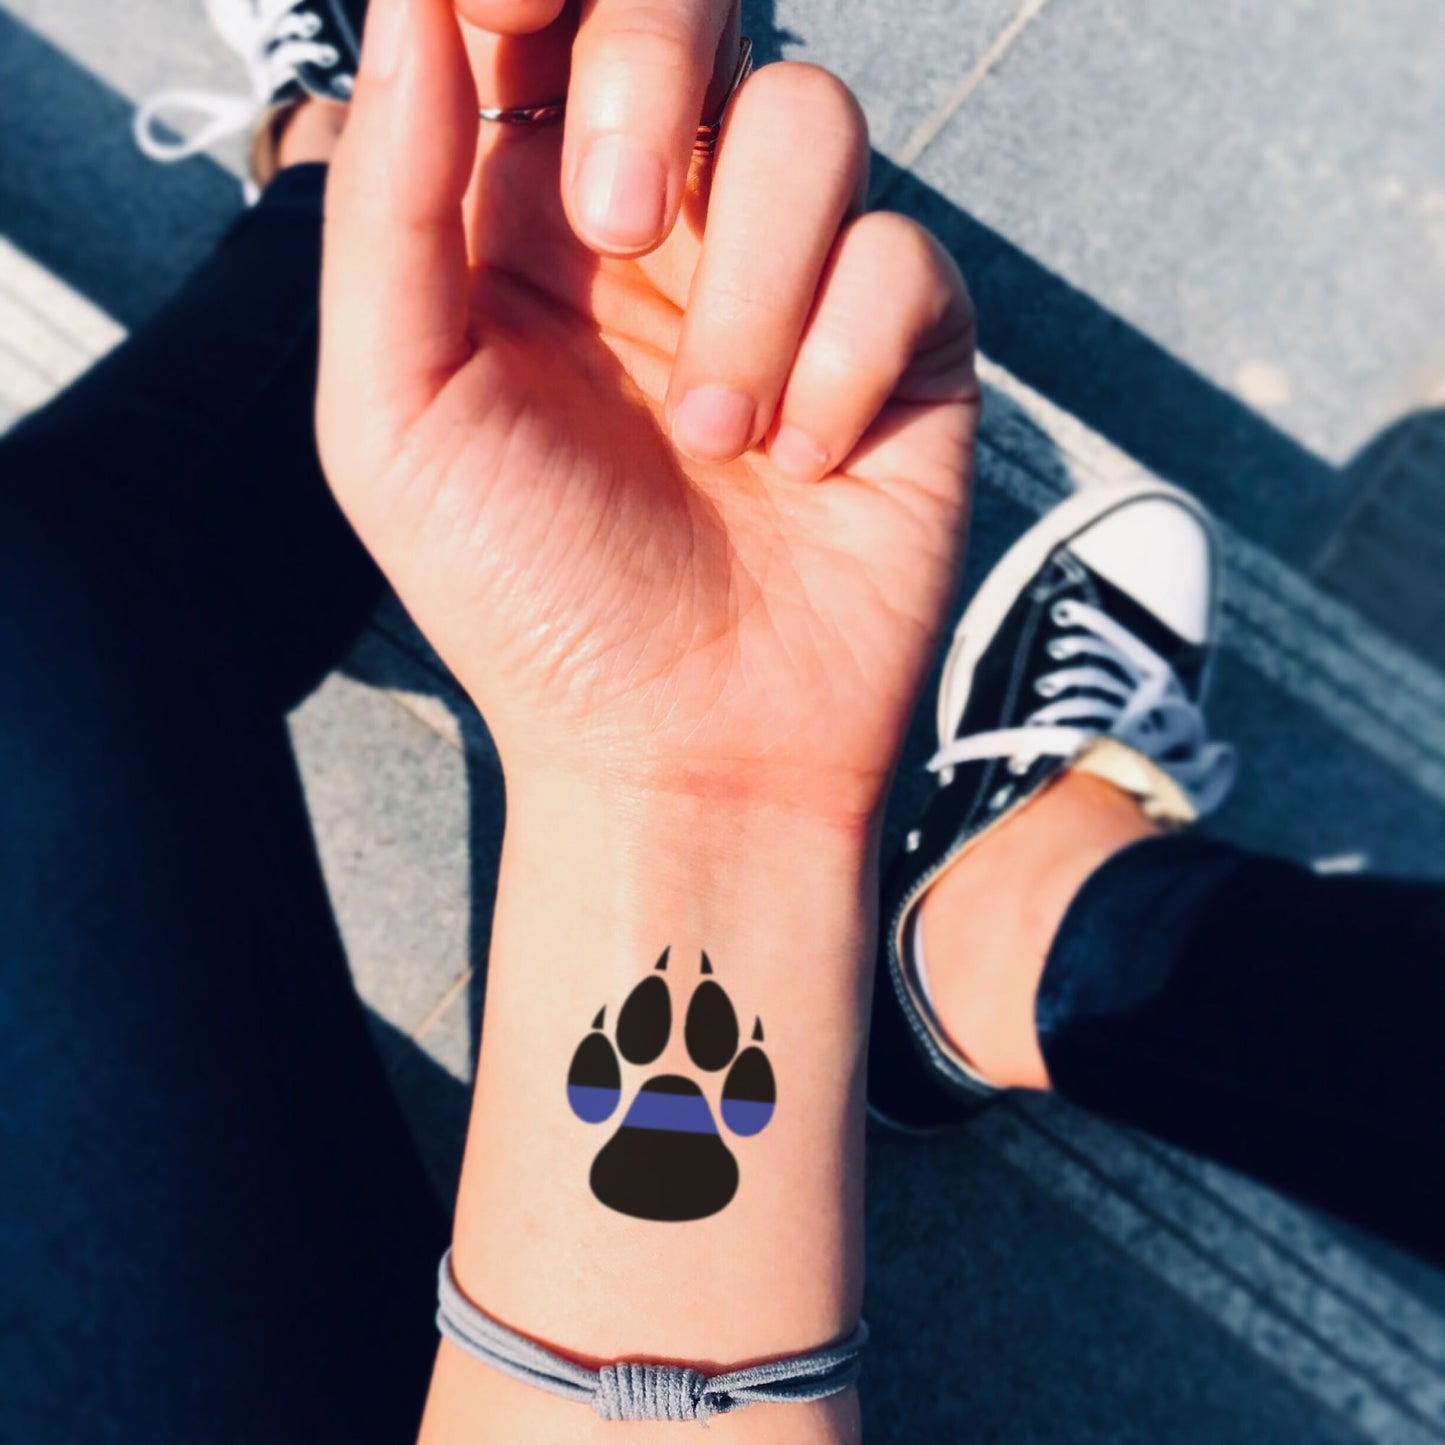 fake small sheepdog law enforcement police military thin blue line paw print color temporary tattoo sticker design idea on wrist